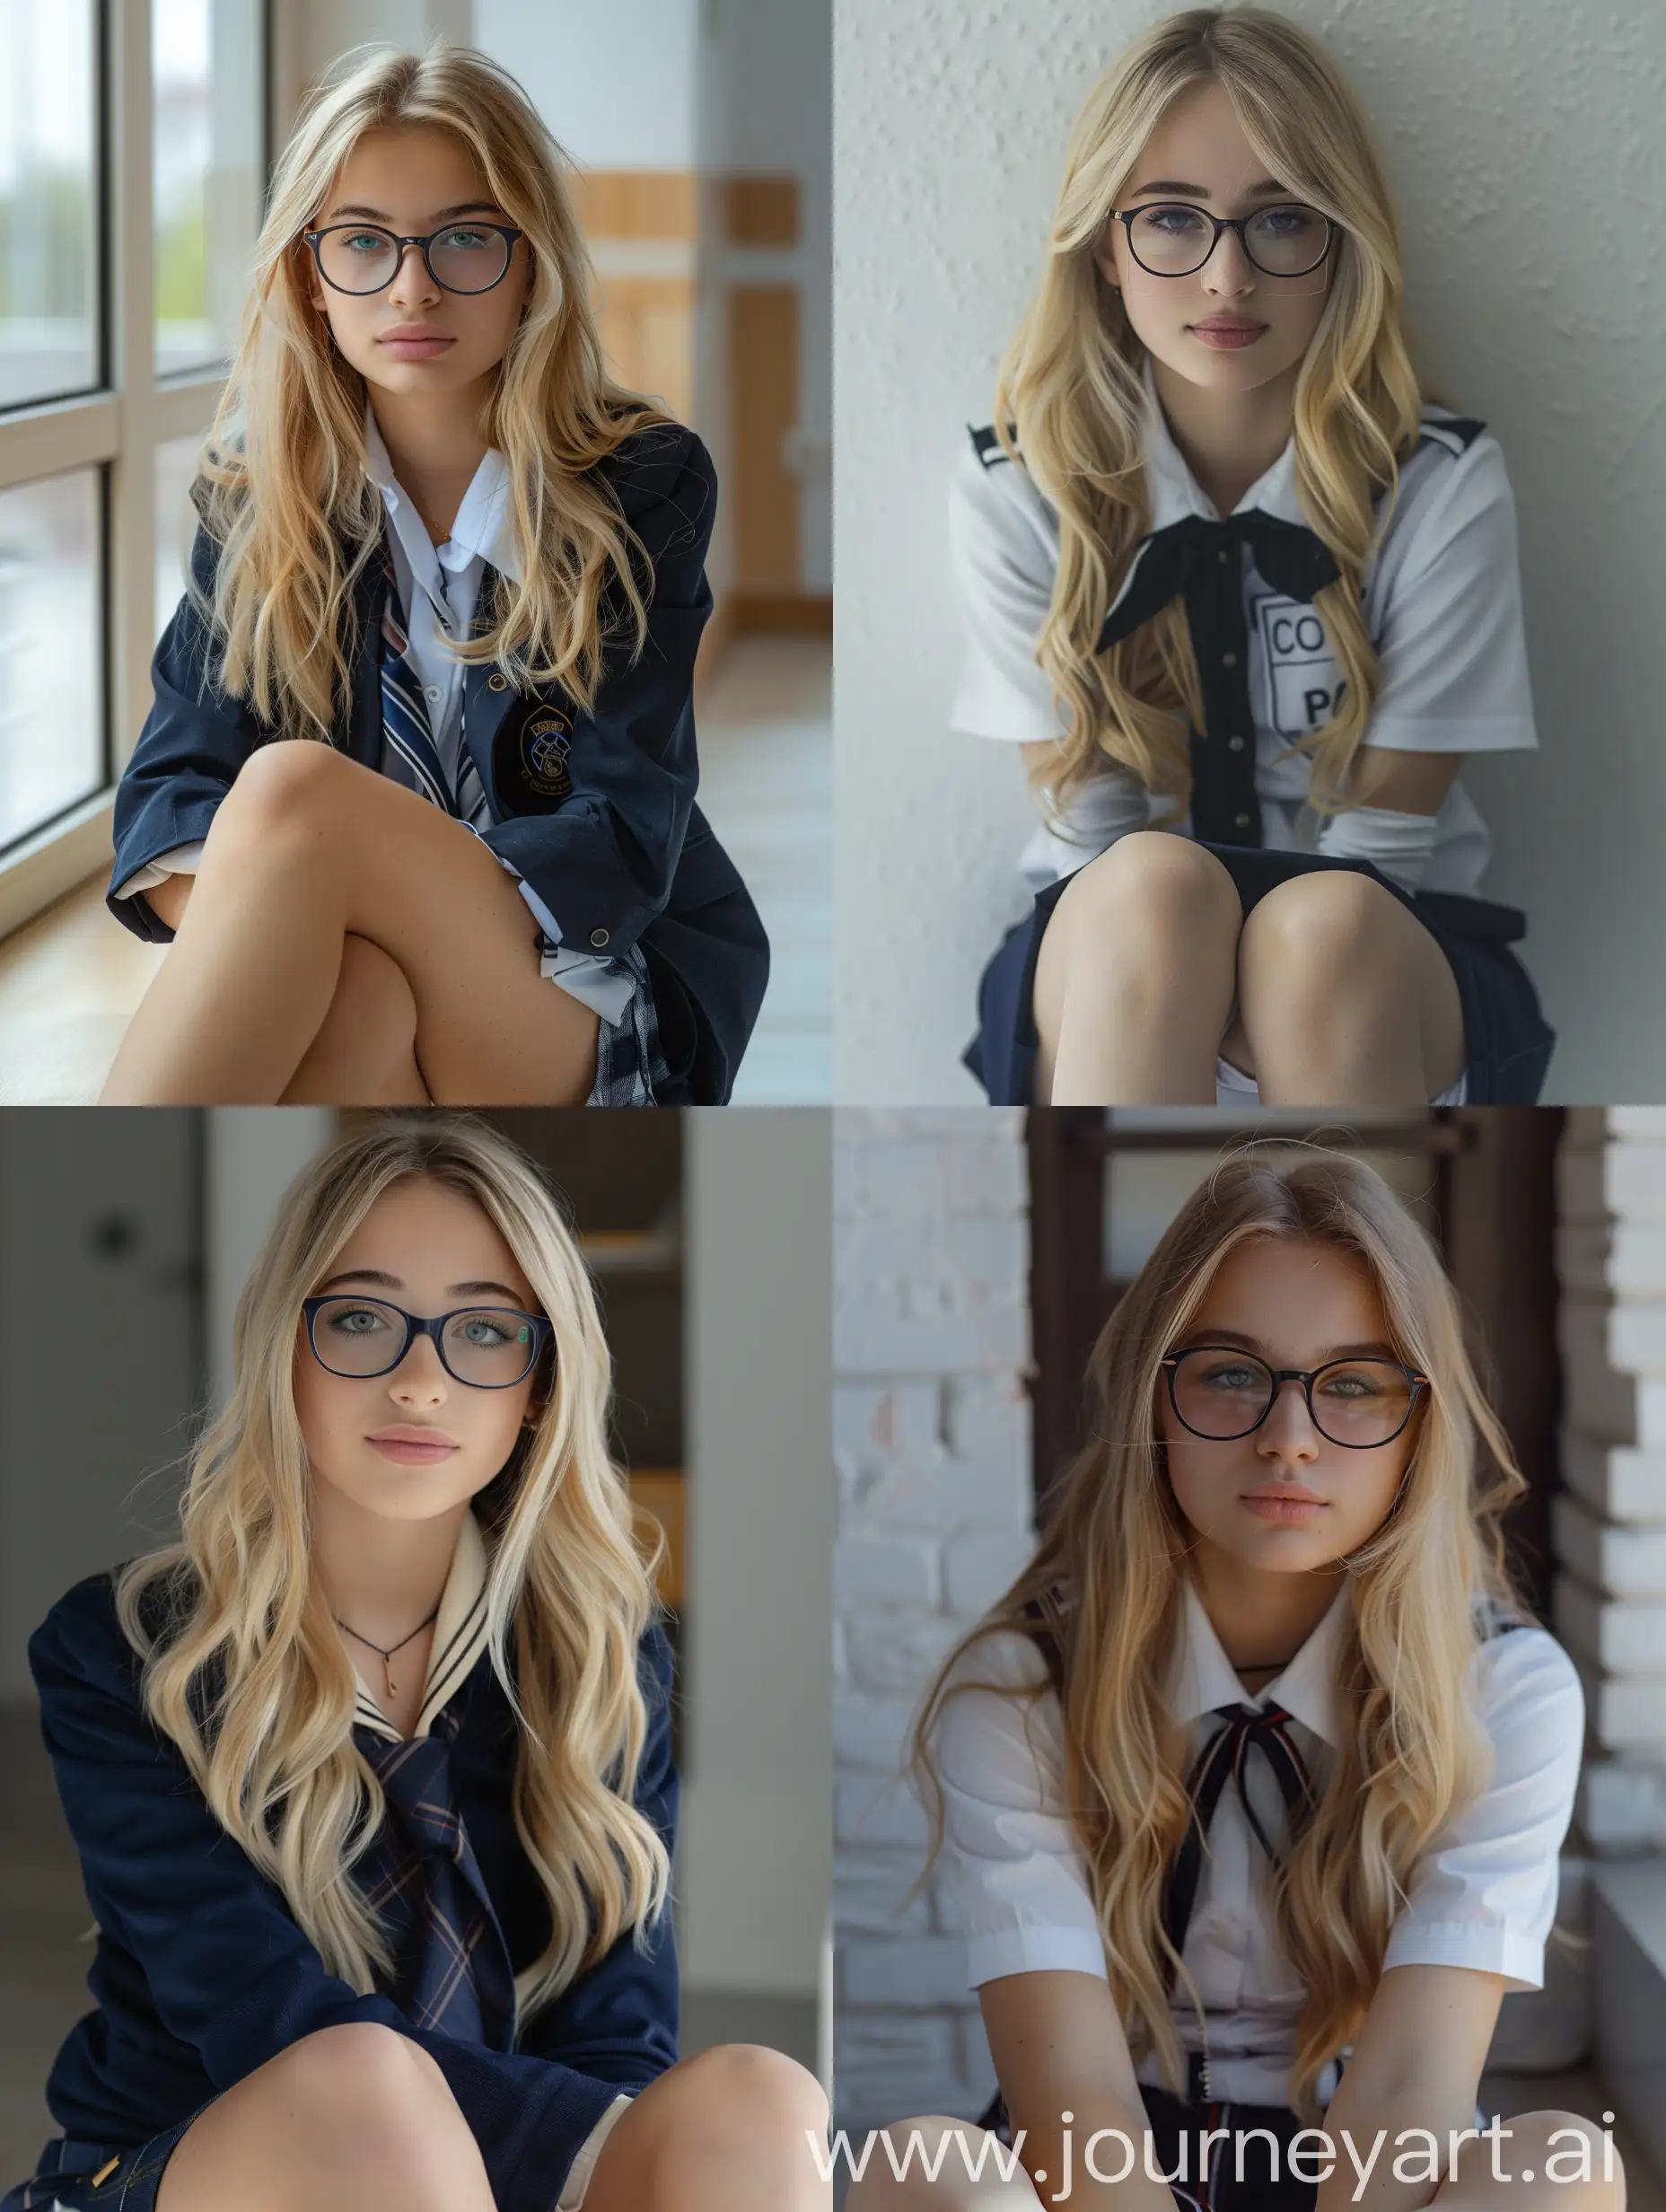 Blonde-Teenage-Girl-with-Glasses-and-School-Uniform-Sitting-at-School